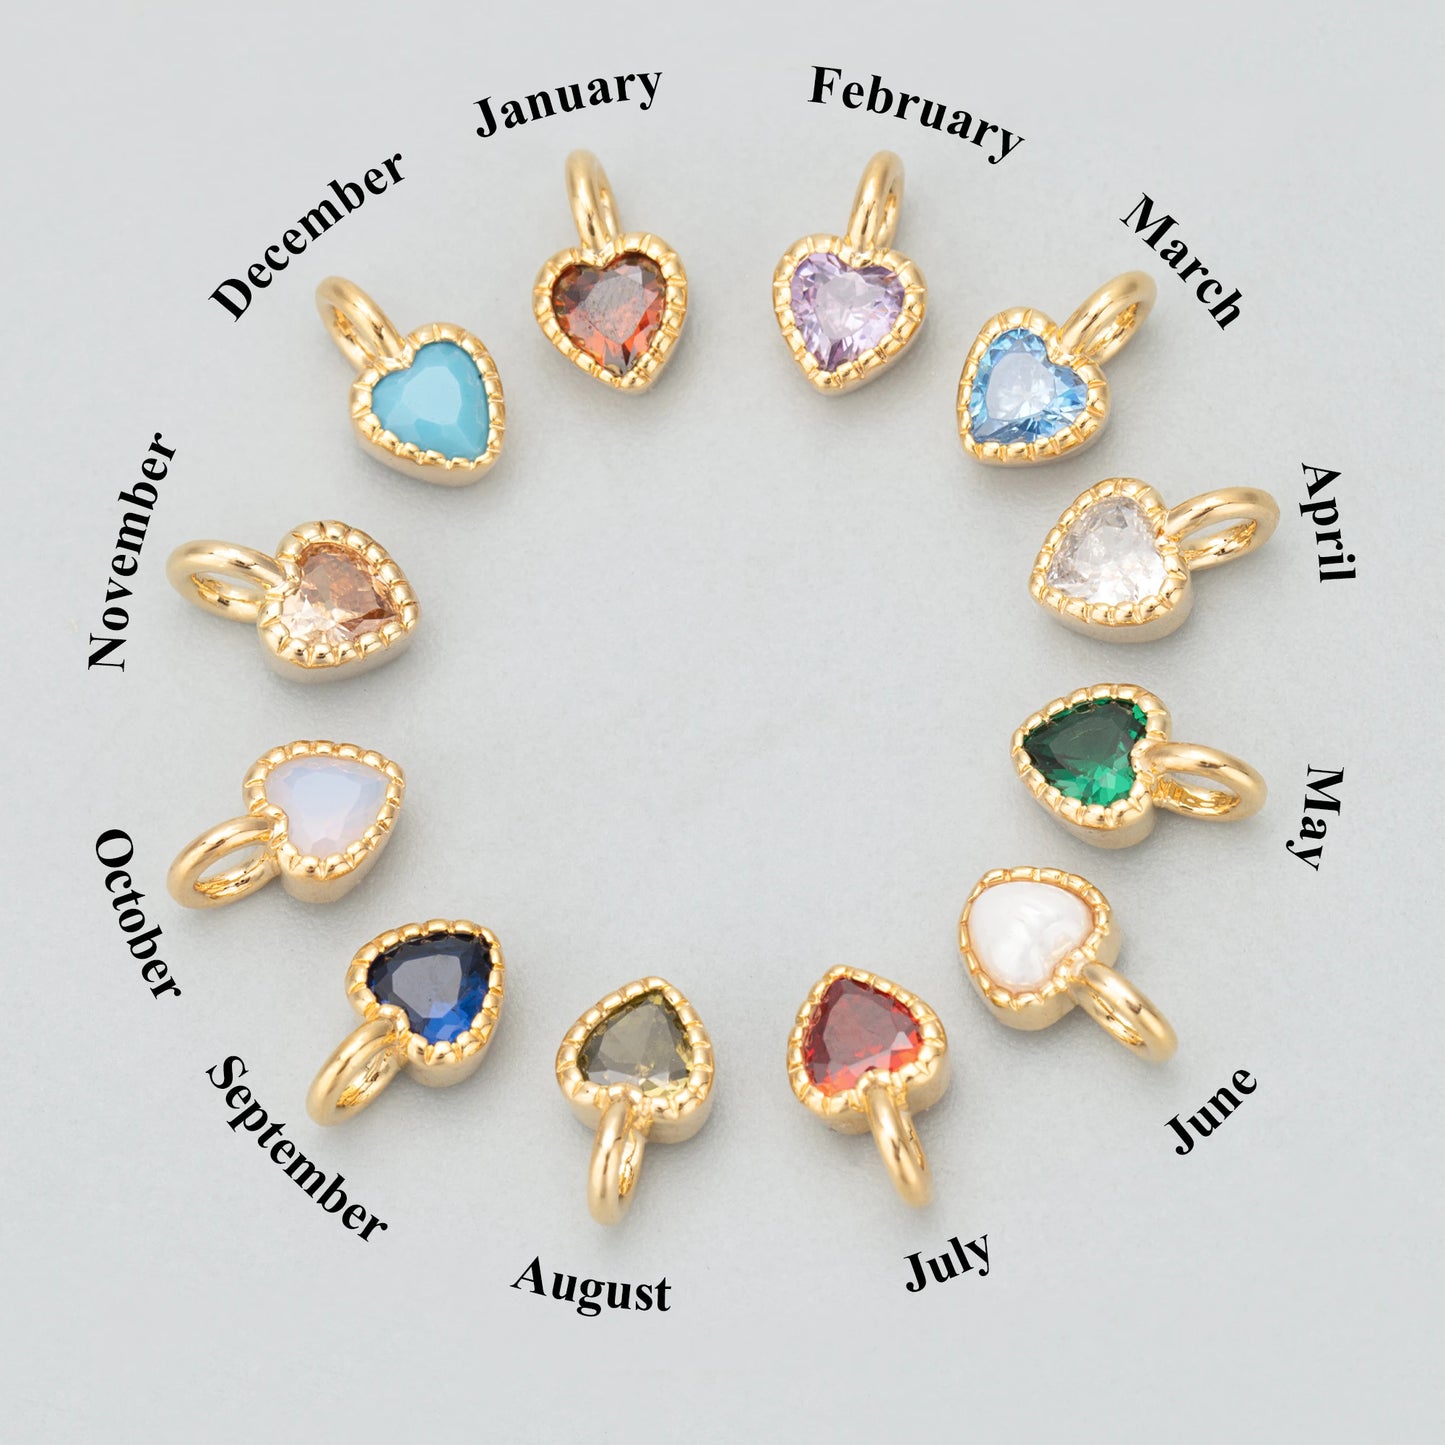 GUFEATHER MD25,jewelry accessories,18k gold rhodium plated,copper,zircons,charms,lucky stone of the month,diy pendants,6pcs/lot